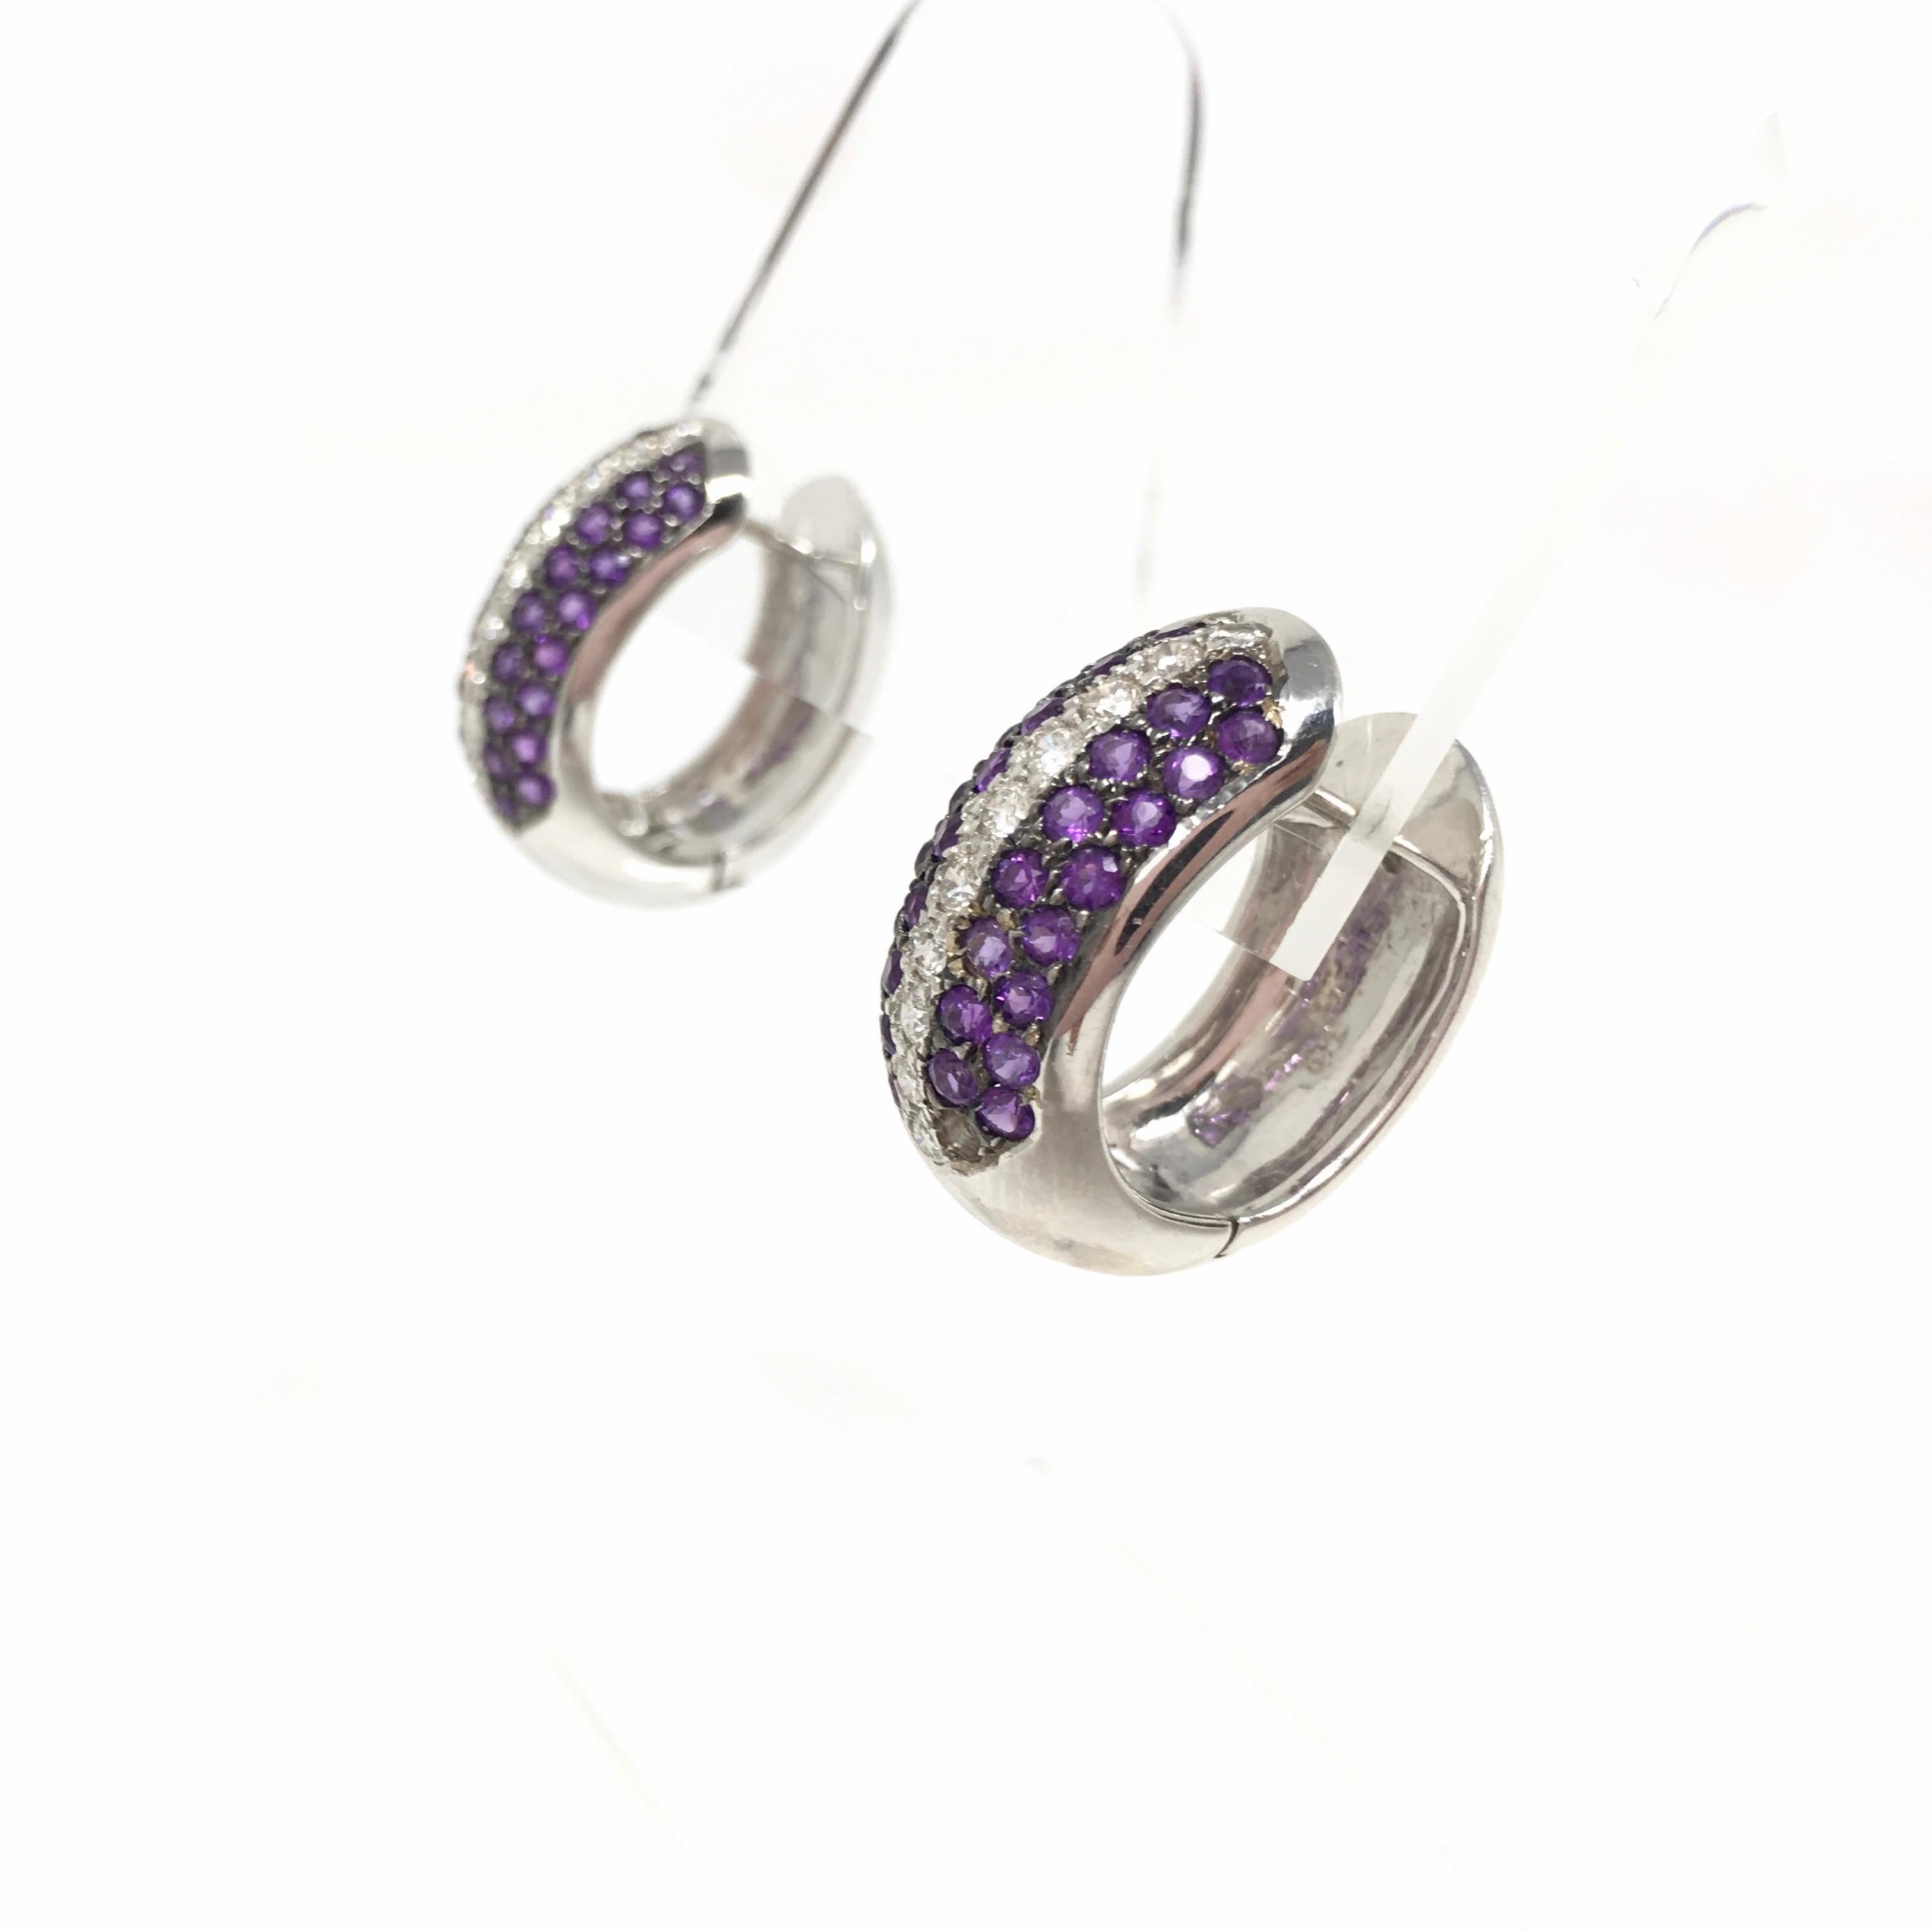 White Round Brilliant Diamond and Amethyst Hoop Earrings in 18 Karat White Gold For Sale 1